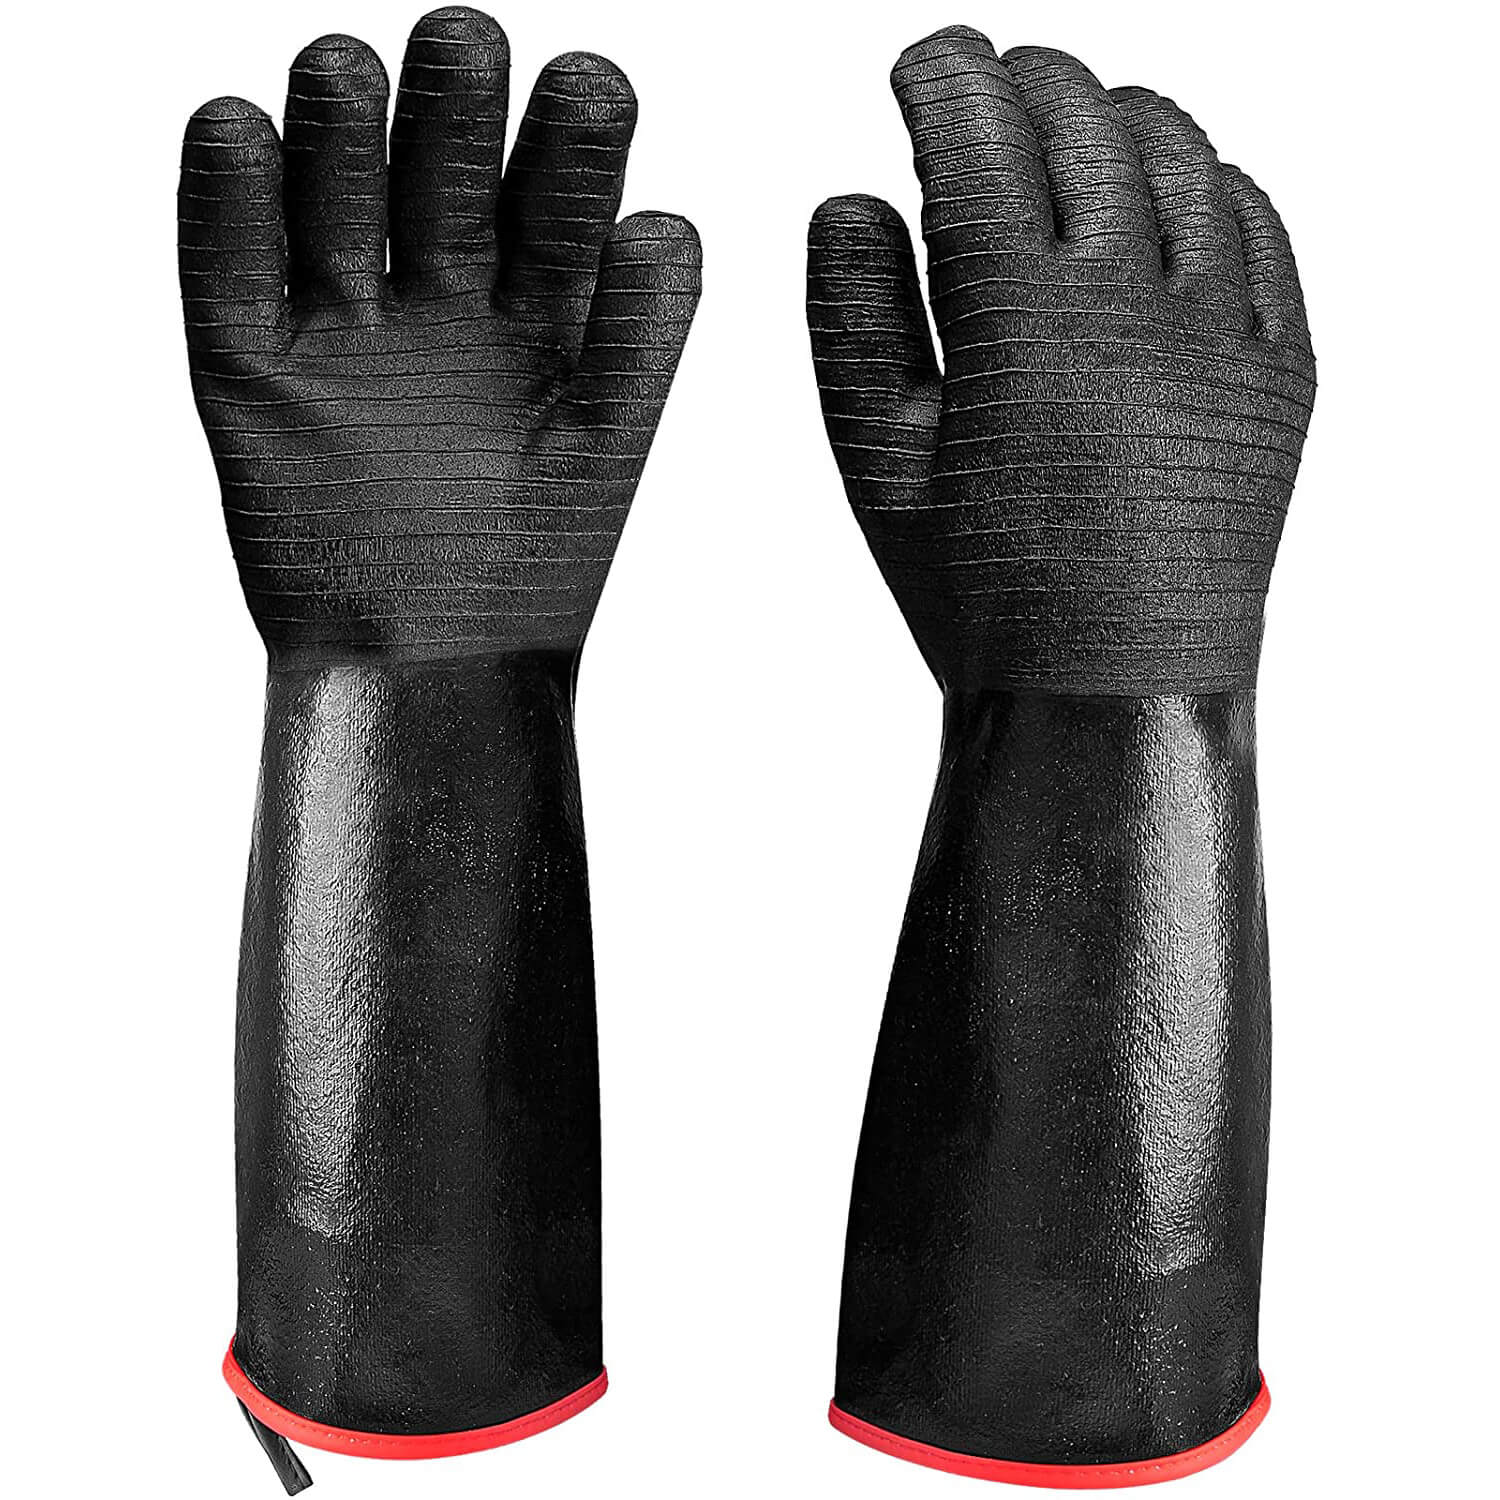 Insulated Rubber Grilling Gloves